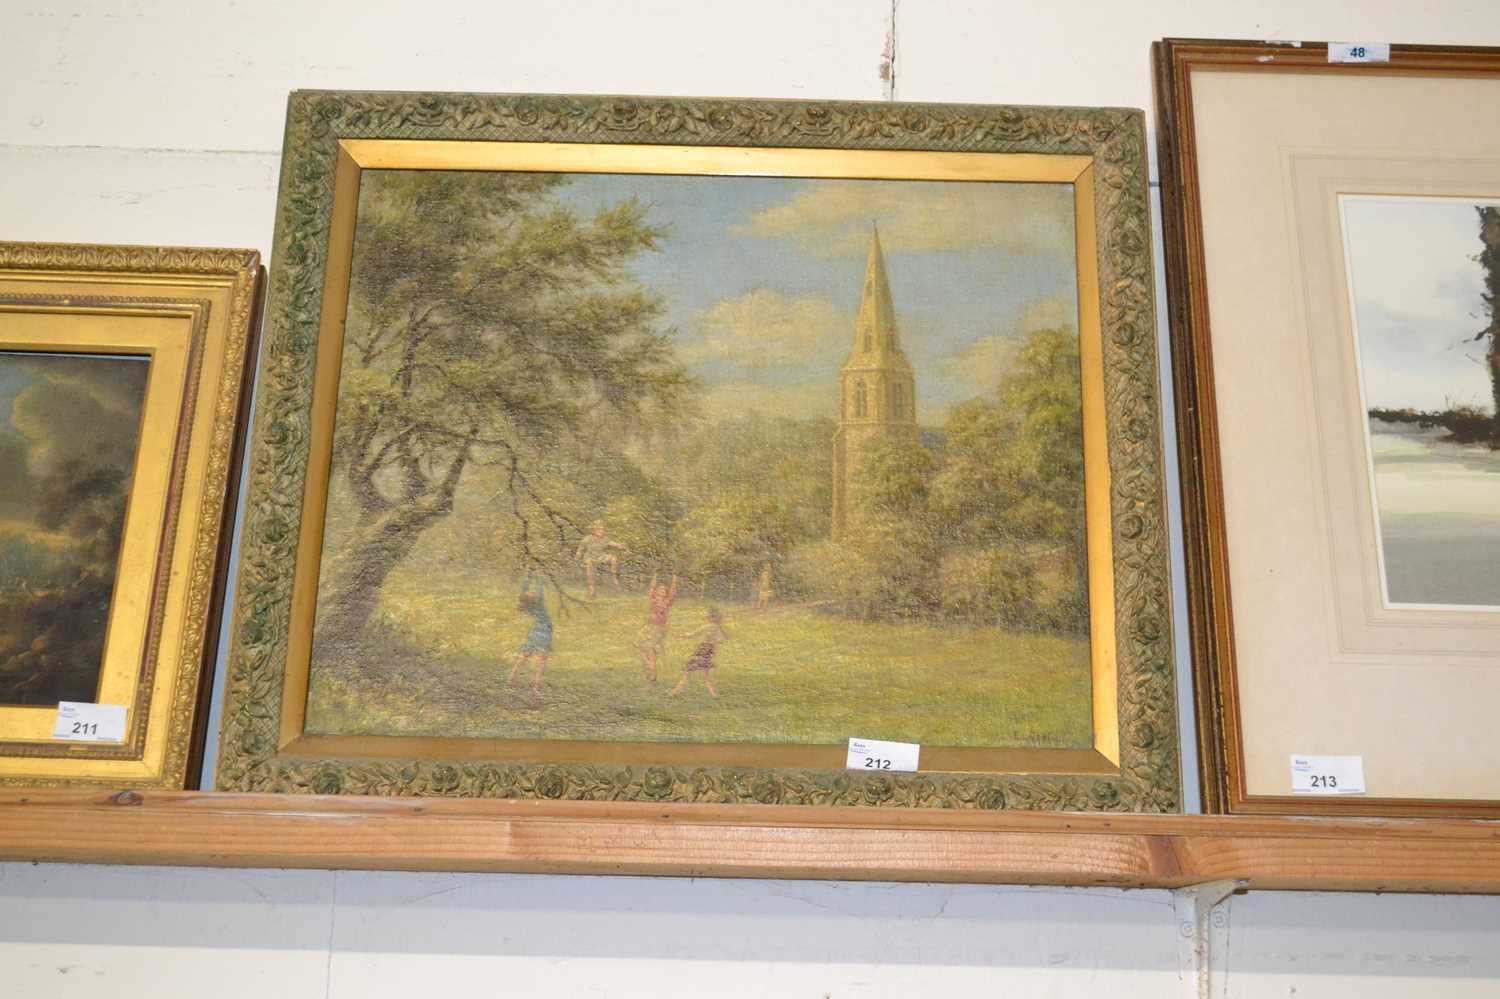 E.Costin, study of children playing around a tree, oil on canvas, set in a floral gilt frame